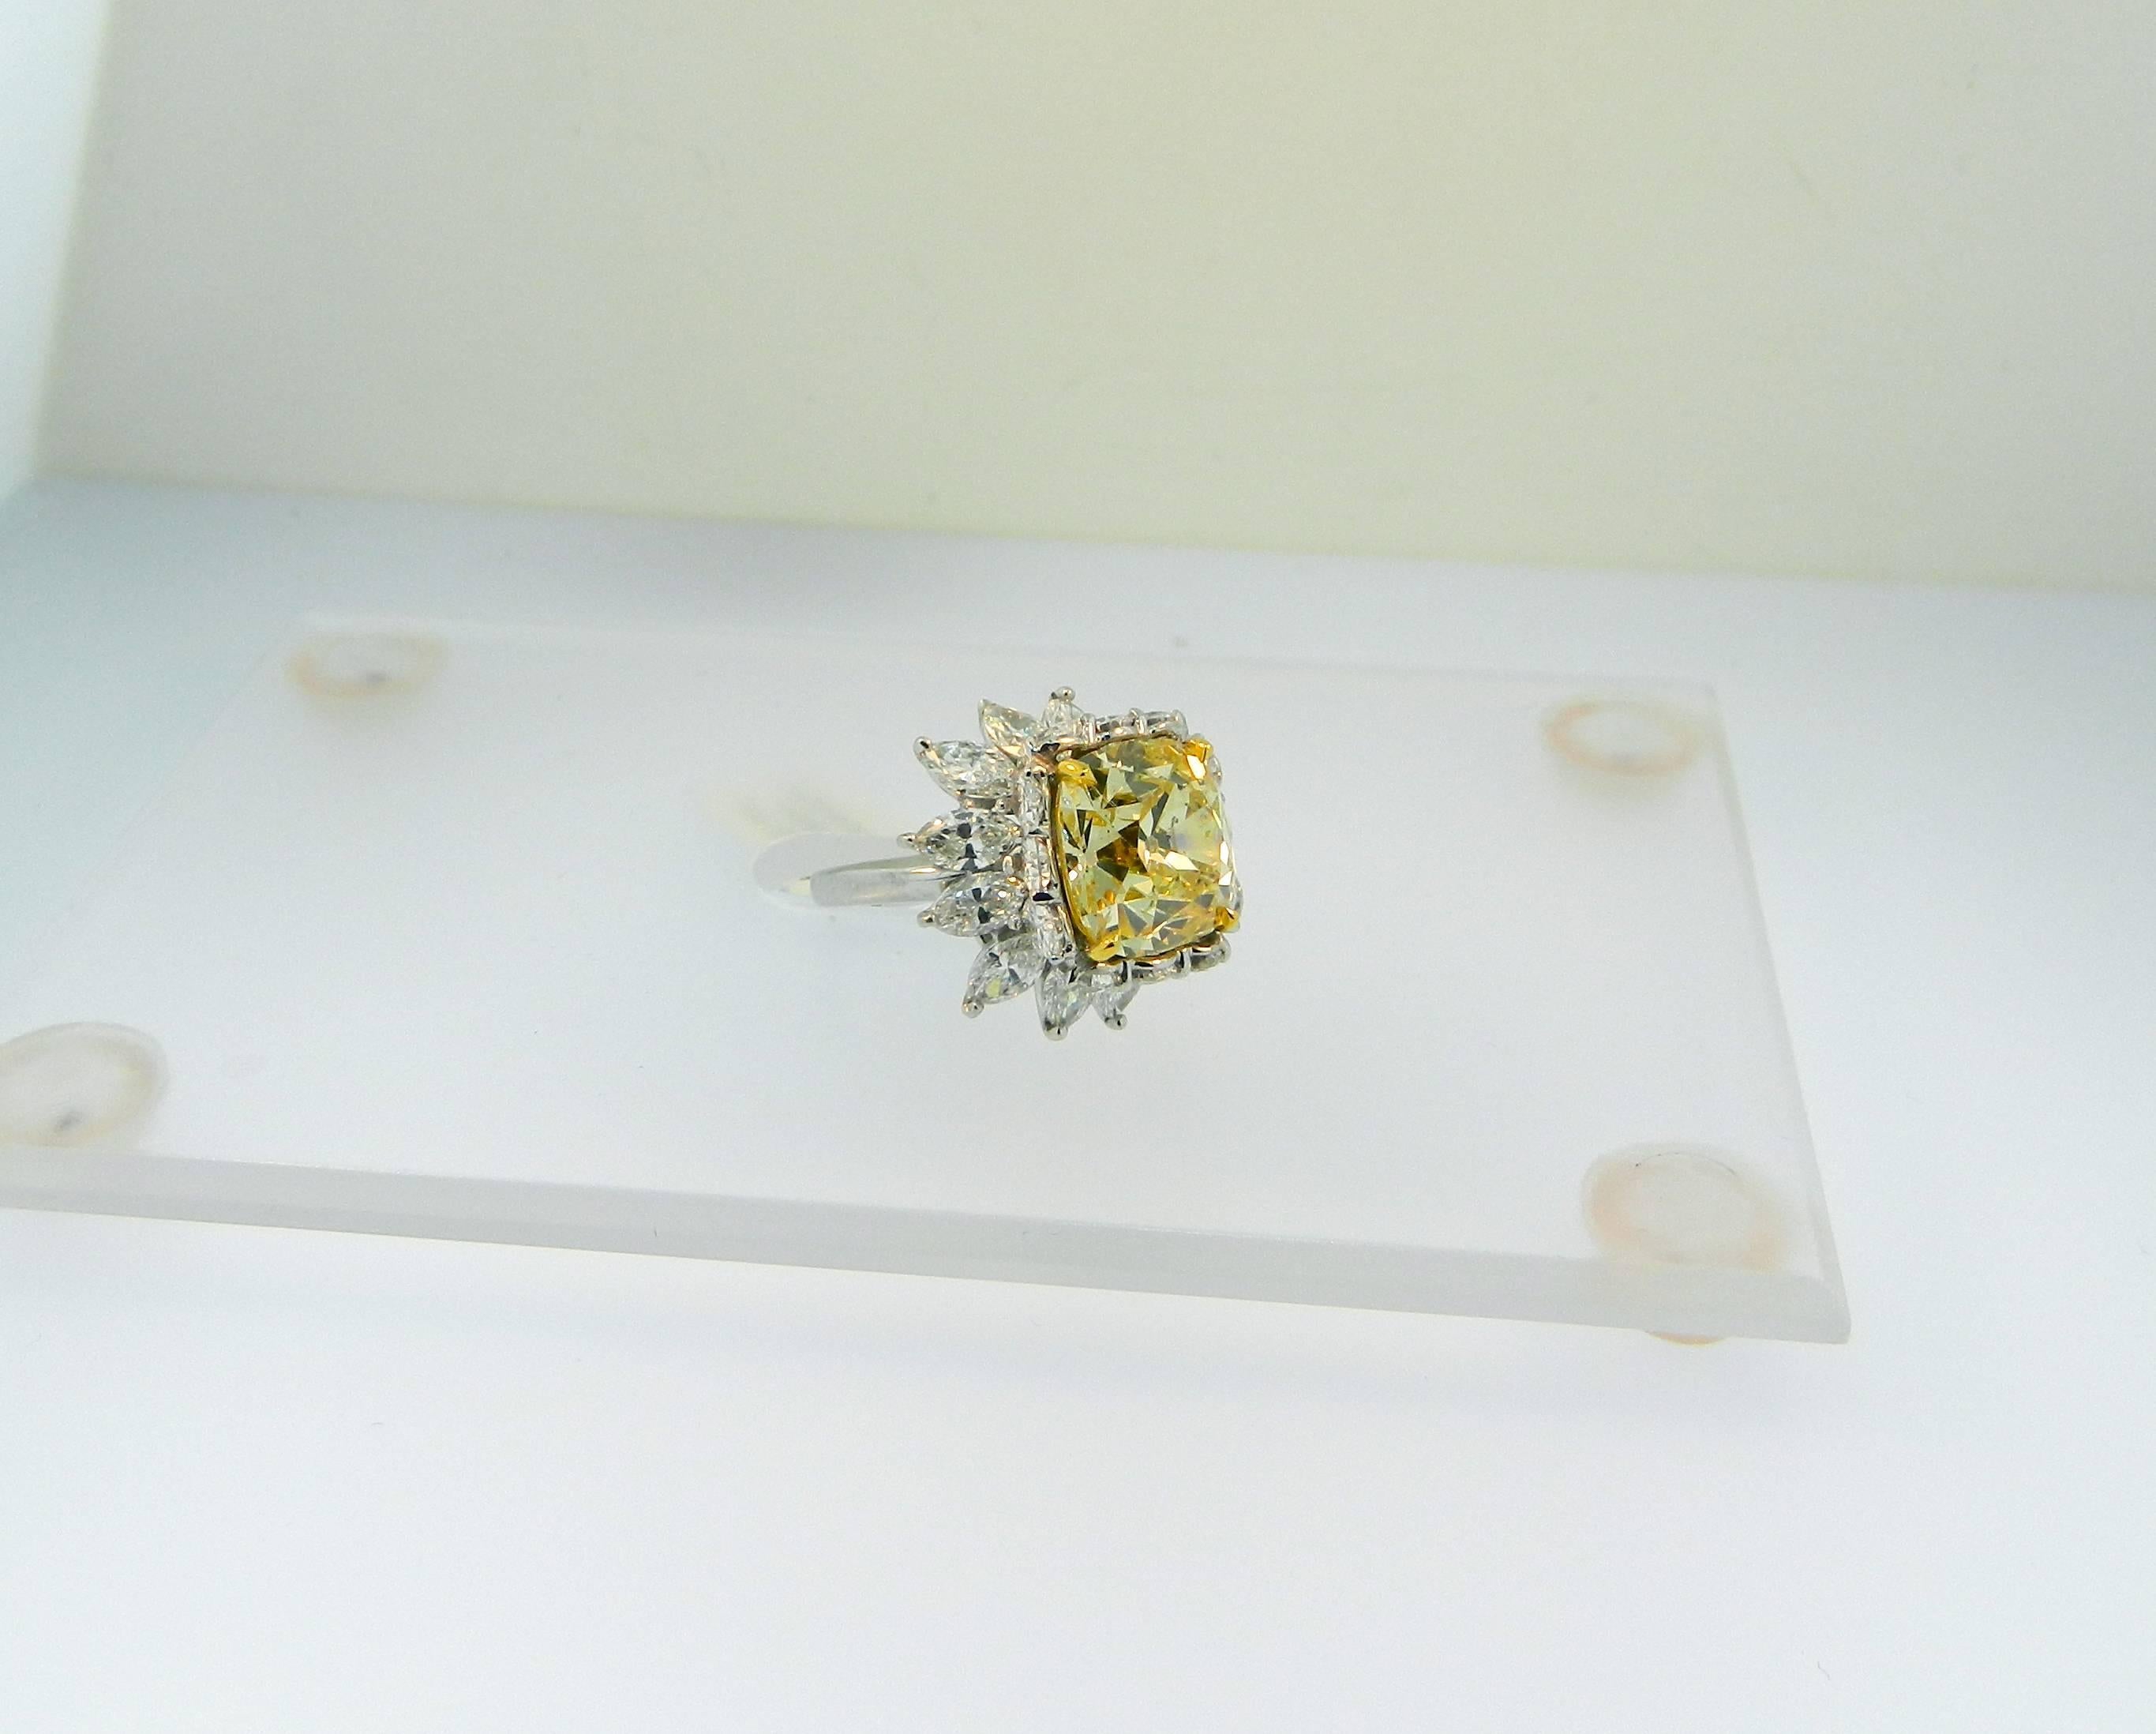 A wonderful and extremely rare GIA certified, antique old mine brilliant cut Fancy Intense Yellow diamond ballerina ring.  Set sometime in the 1950s in platinum, with over 6 carats total weight of fine marquise and pear shape cut diamonds.   The